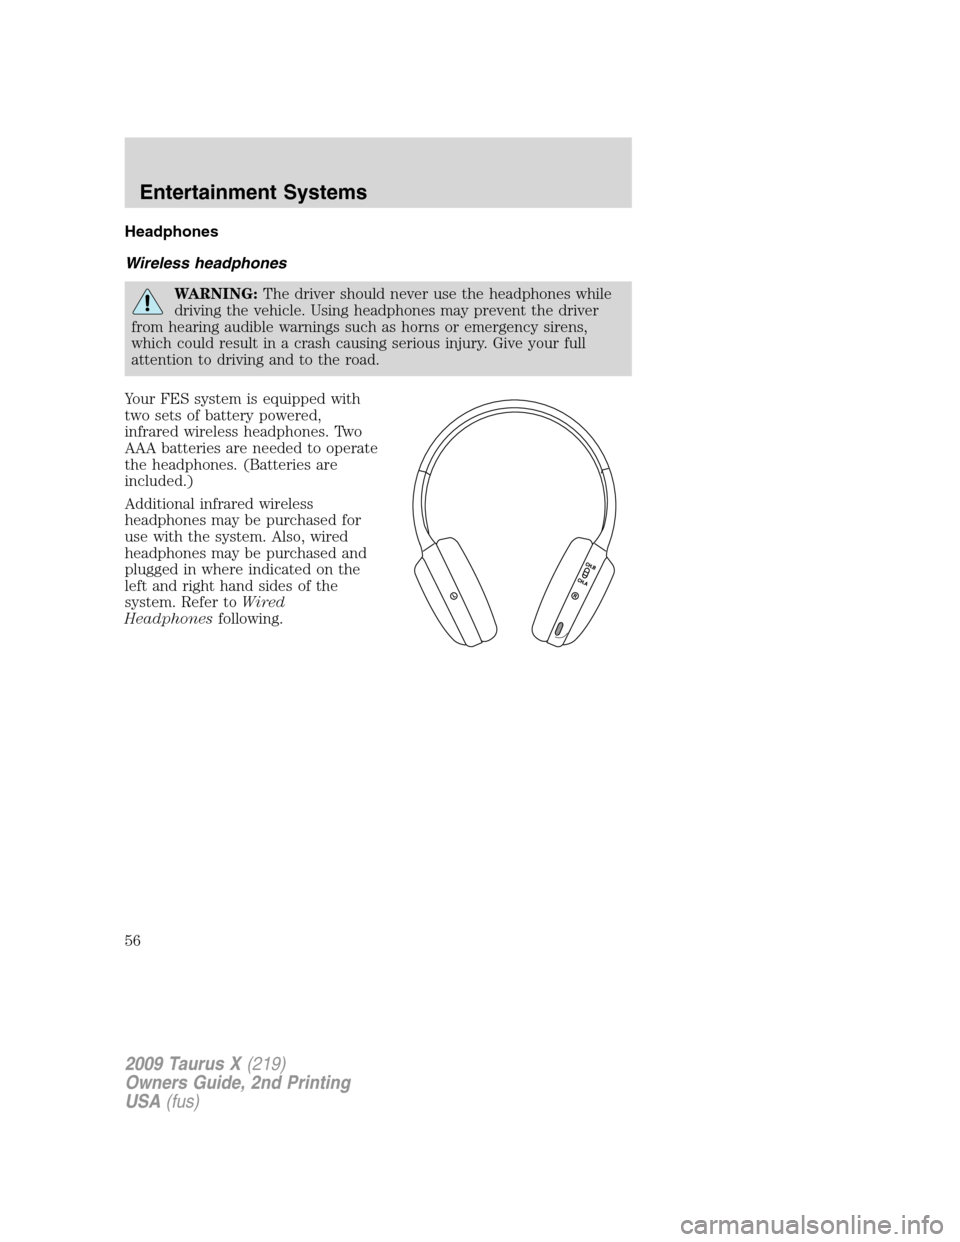 FORD TAURUS X 2009 1.G Owners Manual Headphones
Wireless headphones
WARNING:The driver should never use the headphones while
driving the vehicle. Using headphones may prevent the driver
from hearing audible warnings such as horns or emer